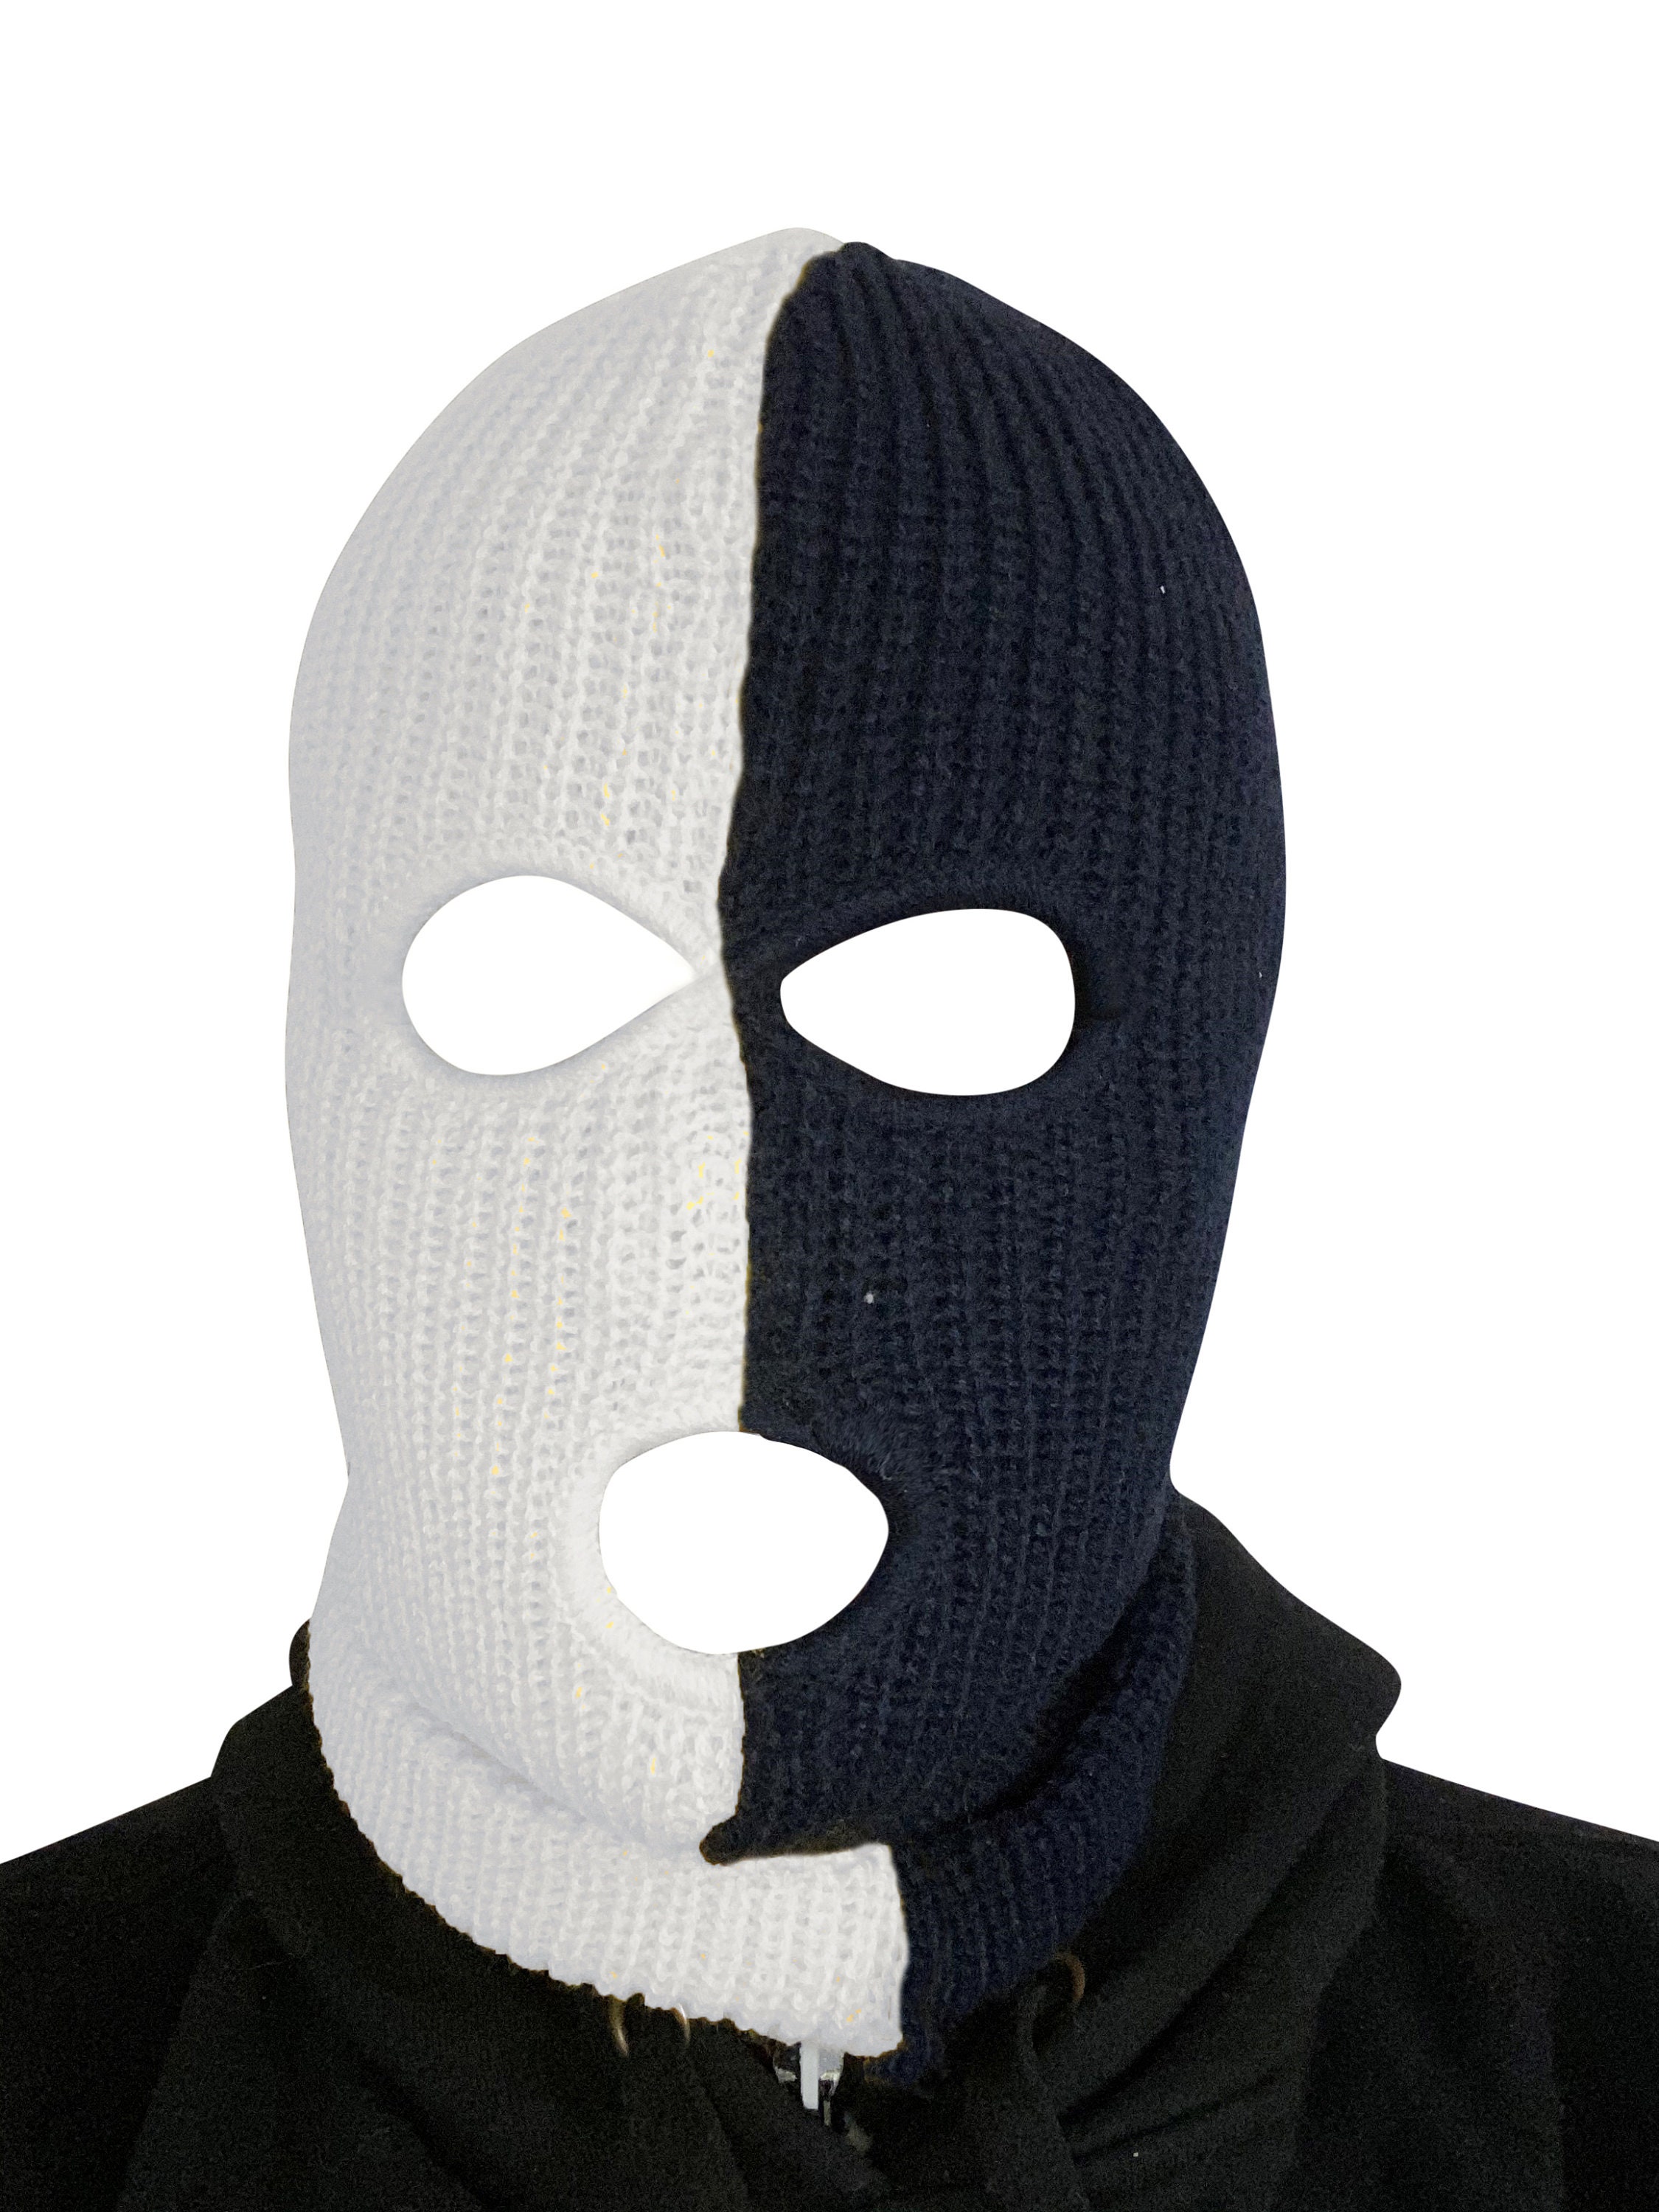 Disguise Blank Male Mask, White, OS